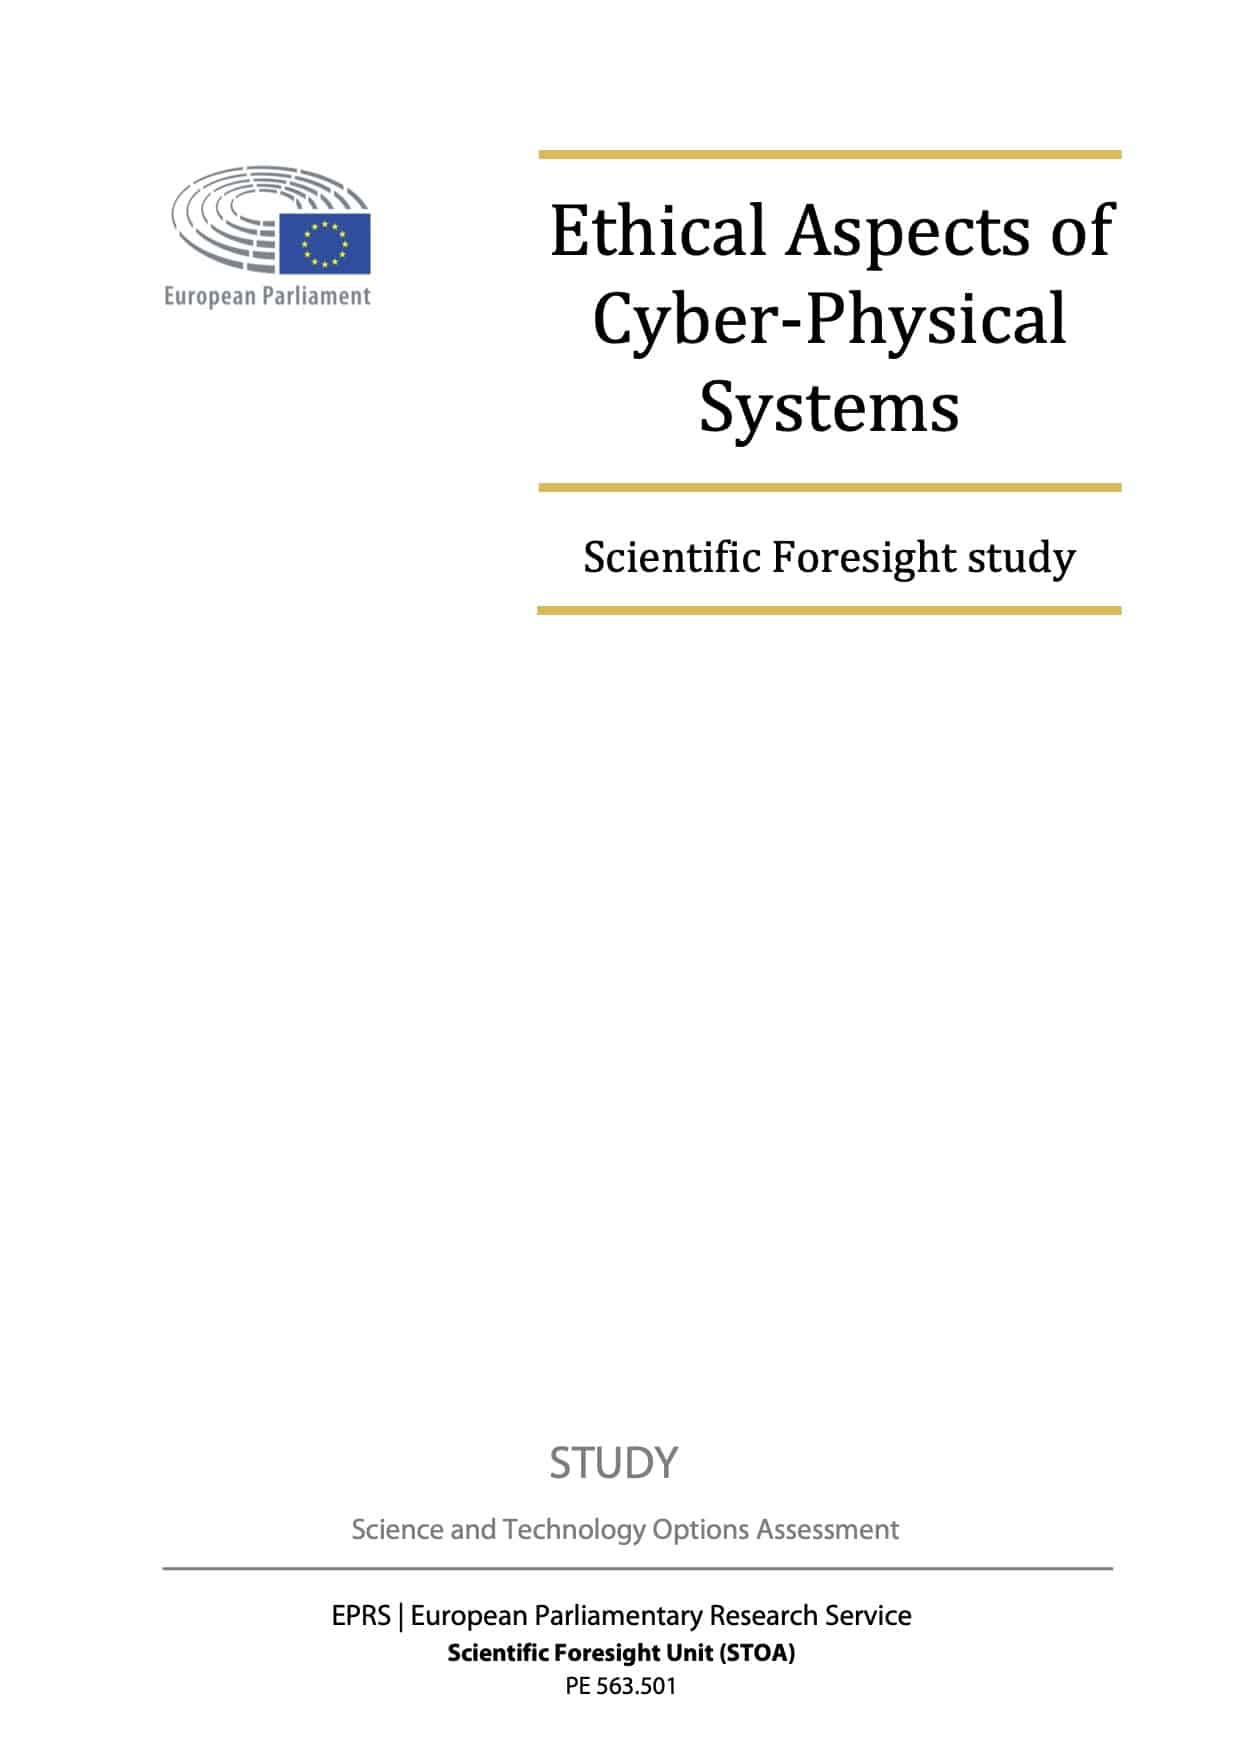 Ethical Aspects of Cyber-Physical Systems. Scientific Foresight Study